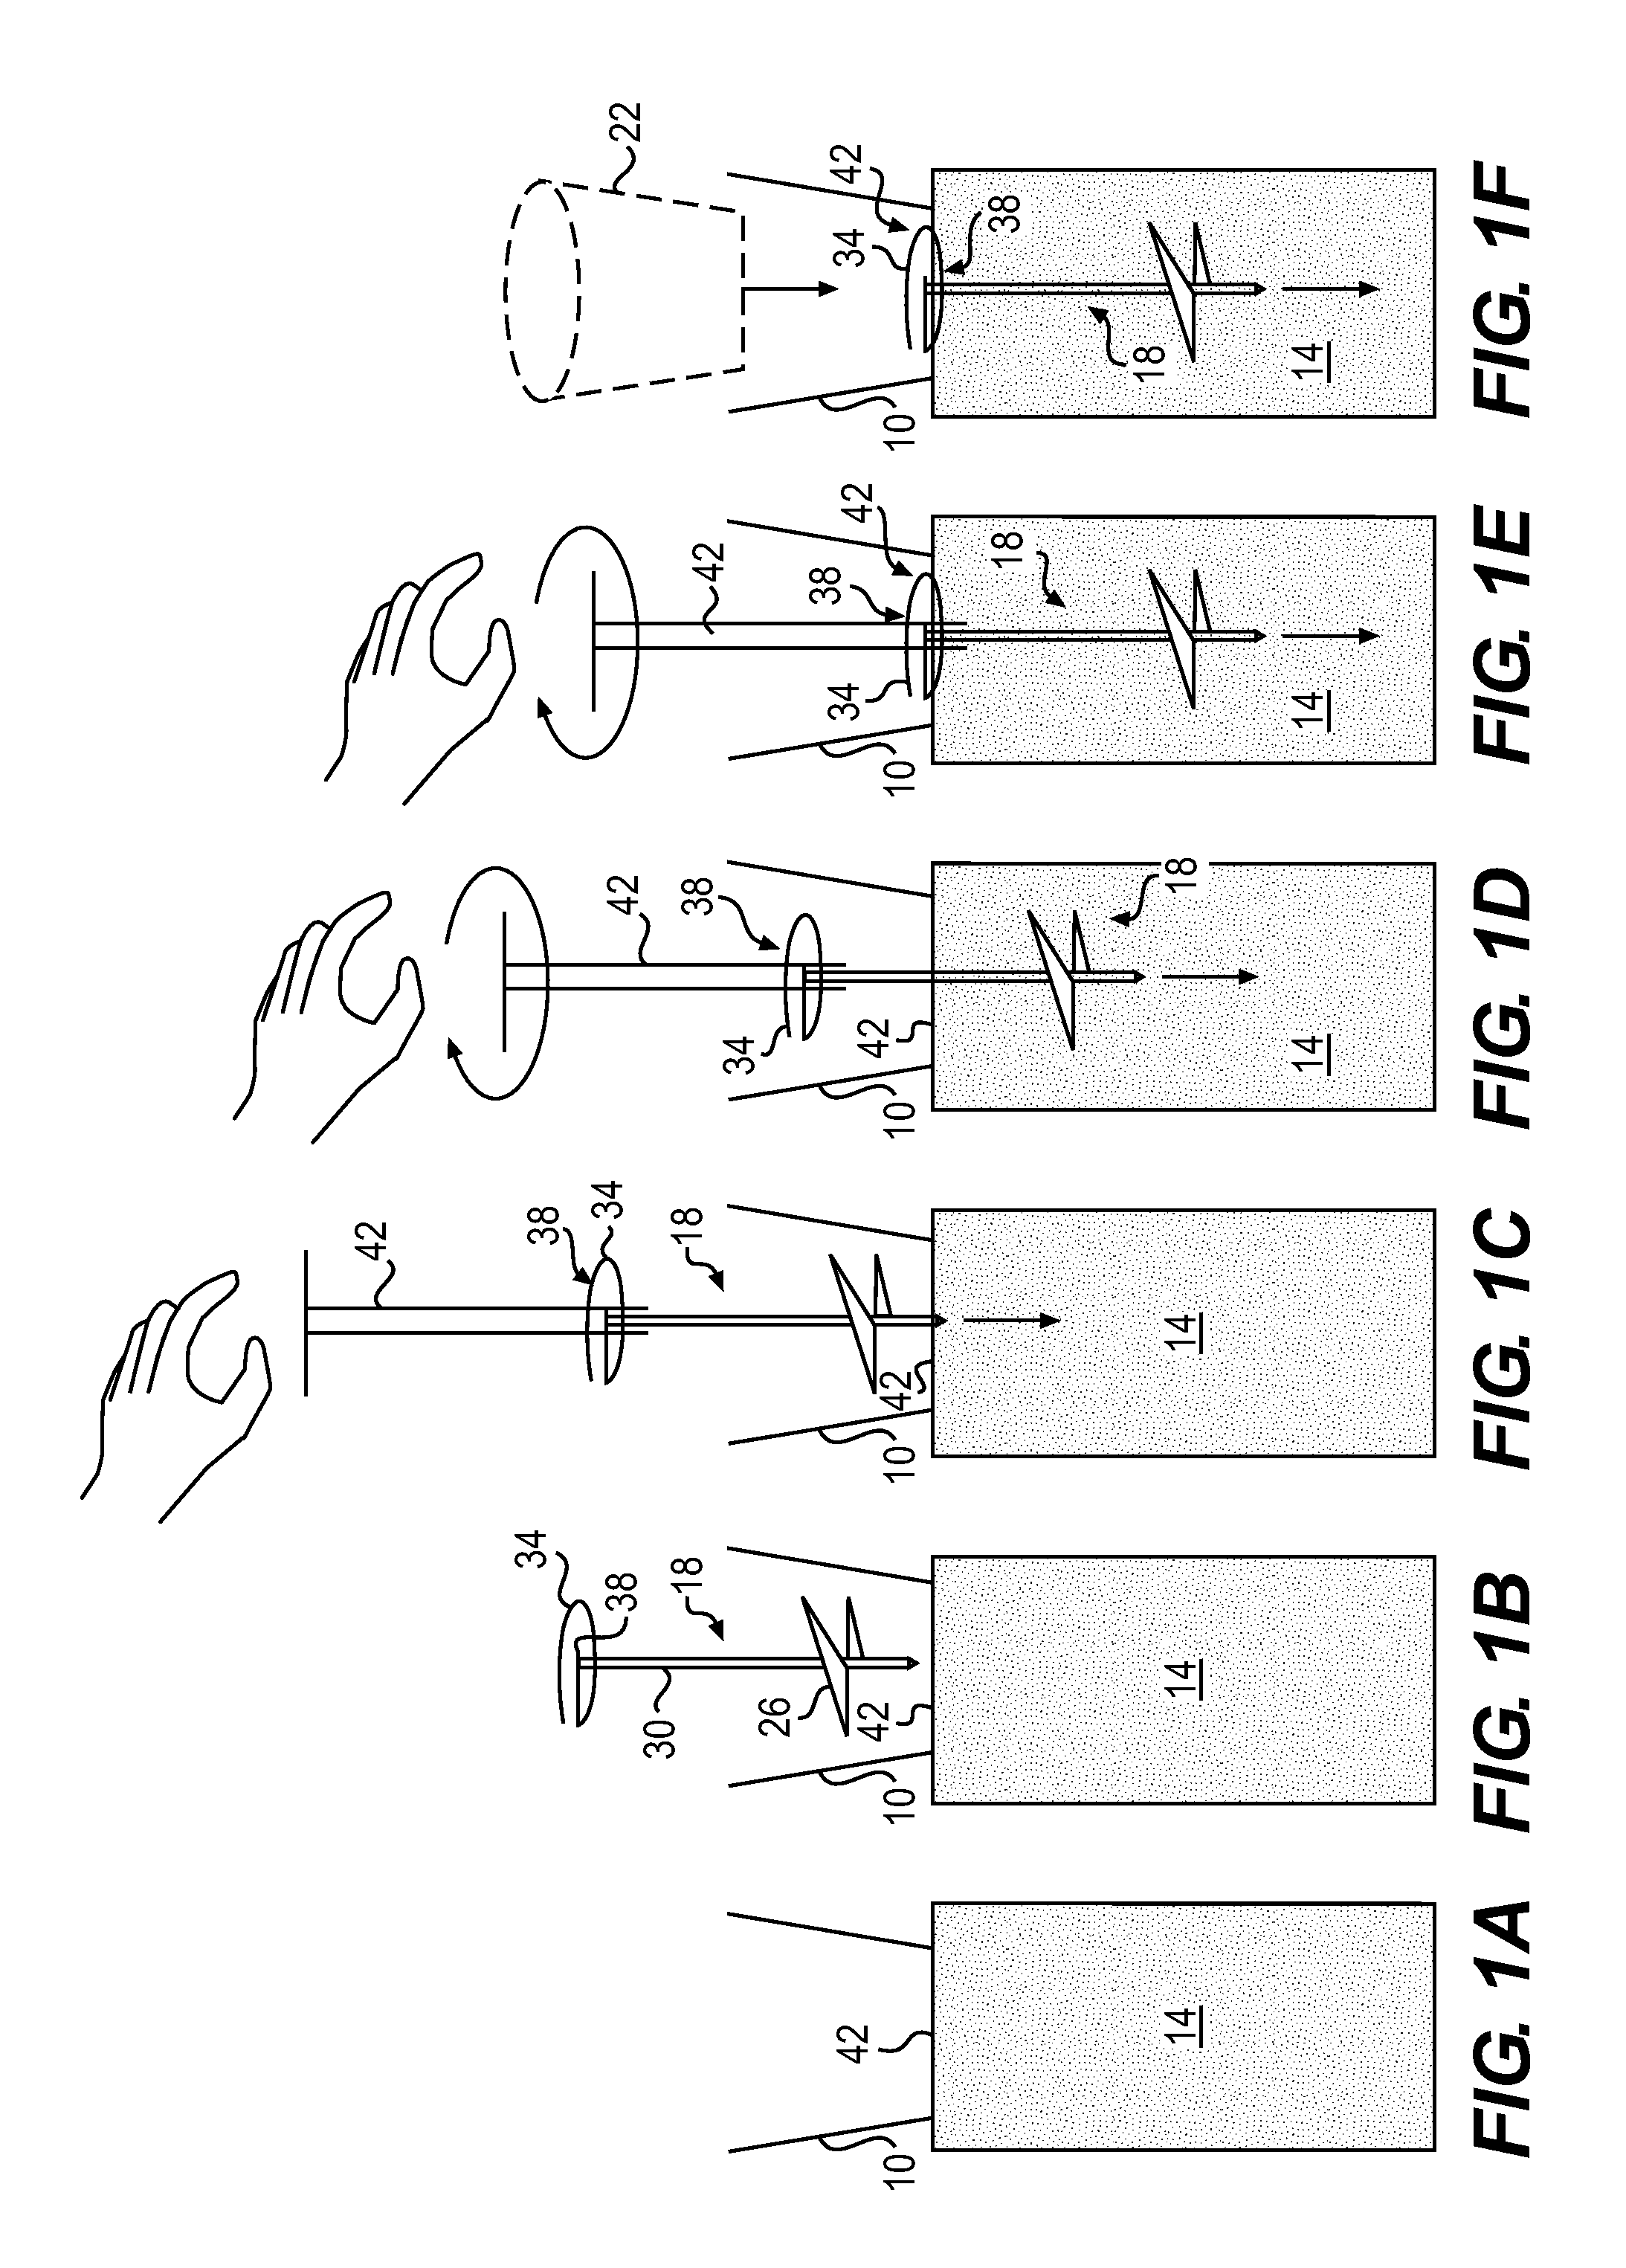 Pot-securing apparatus and method of use thereof